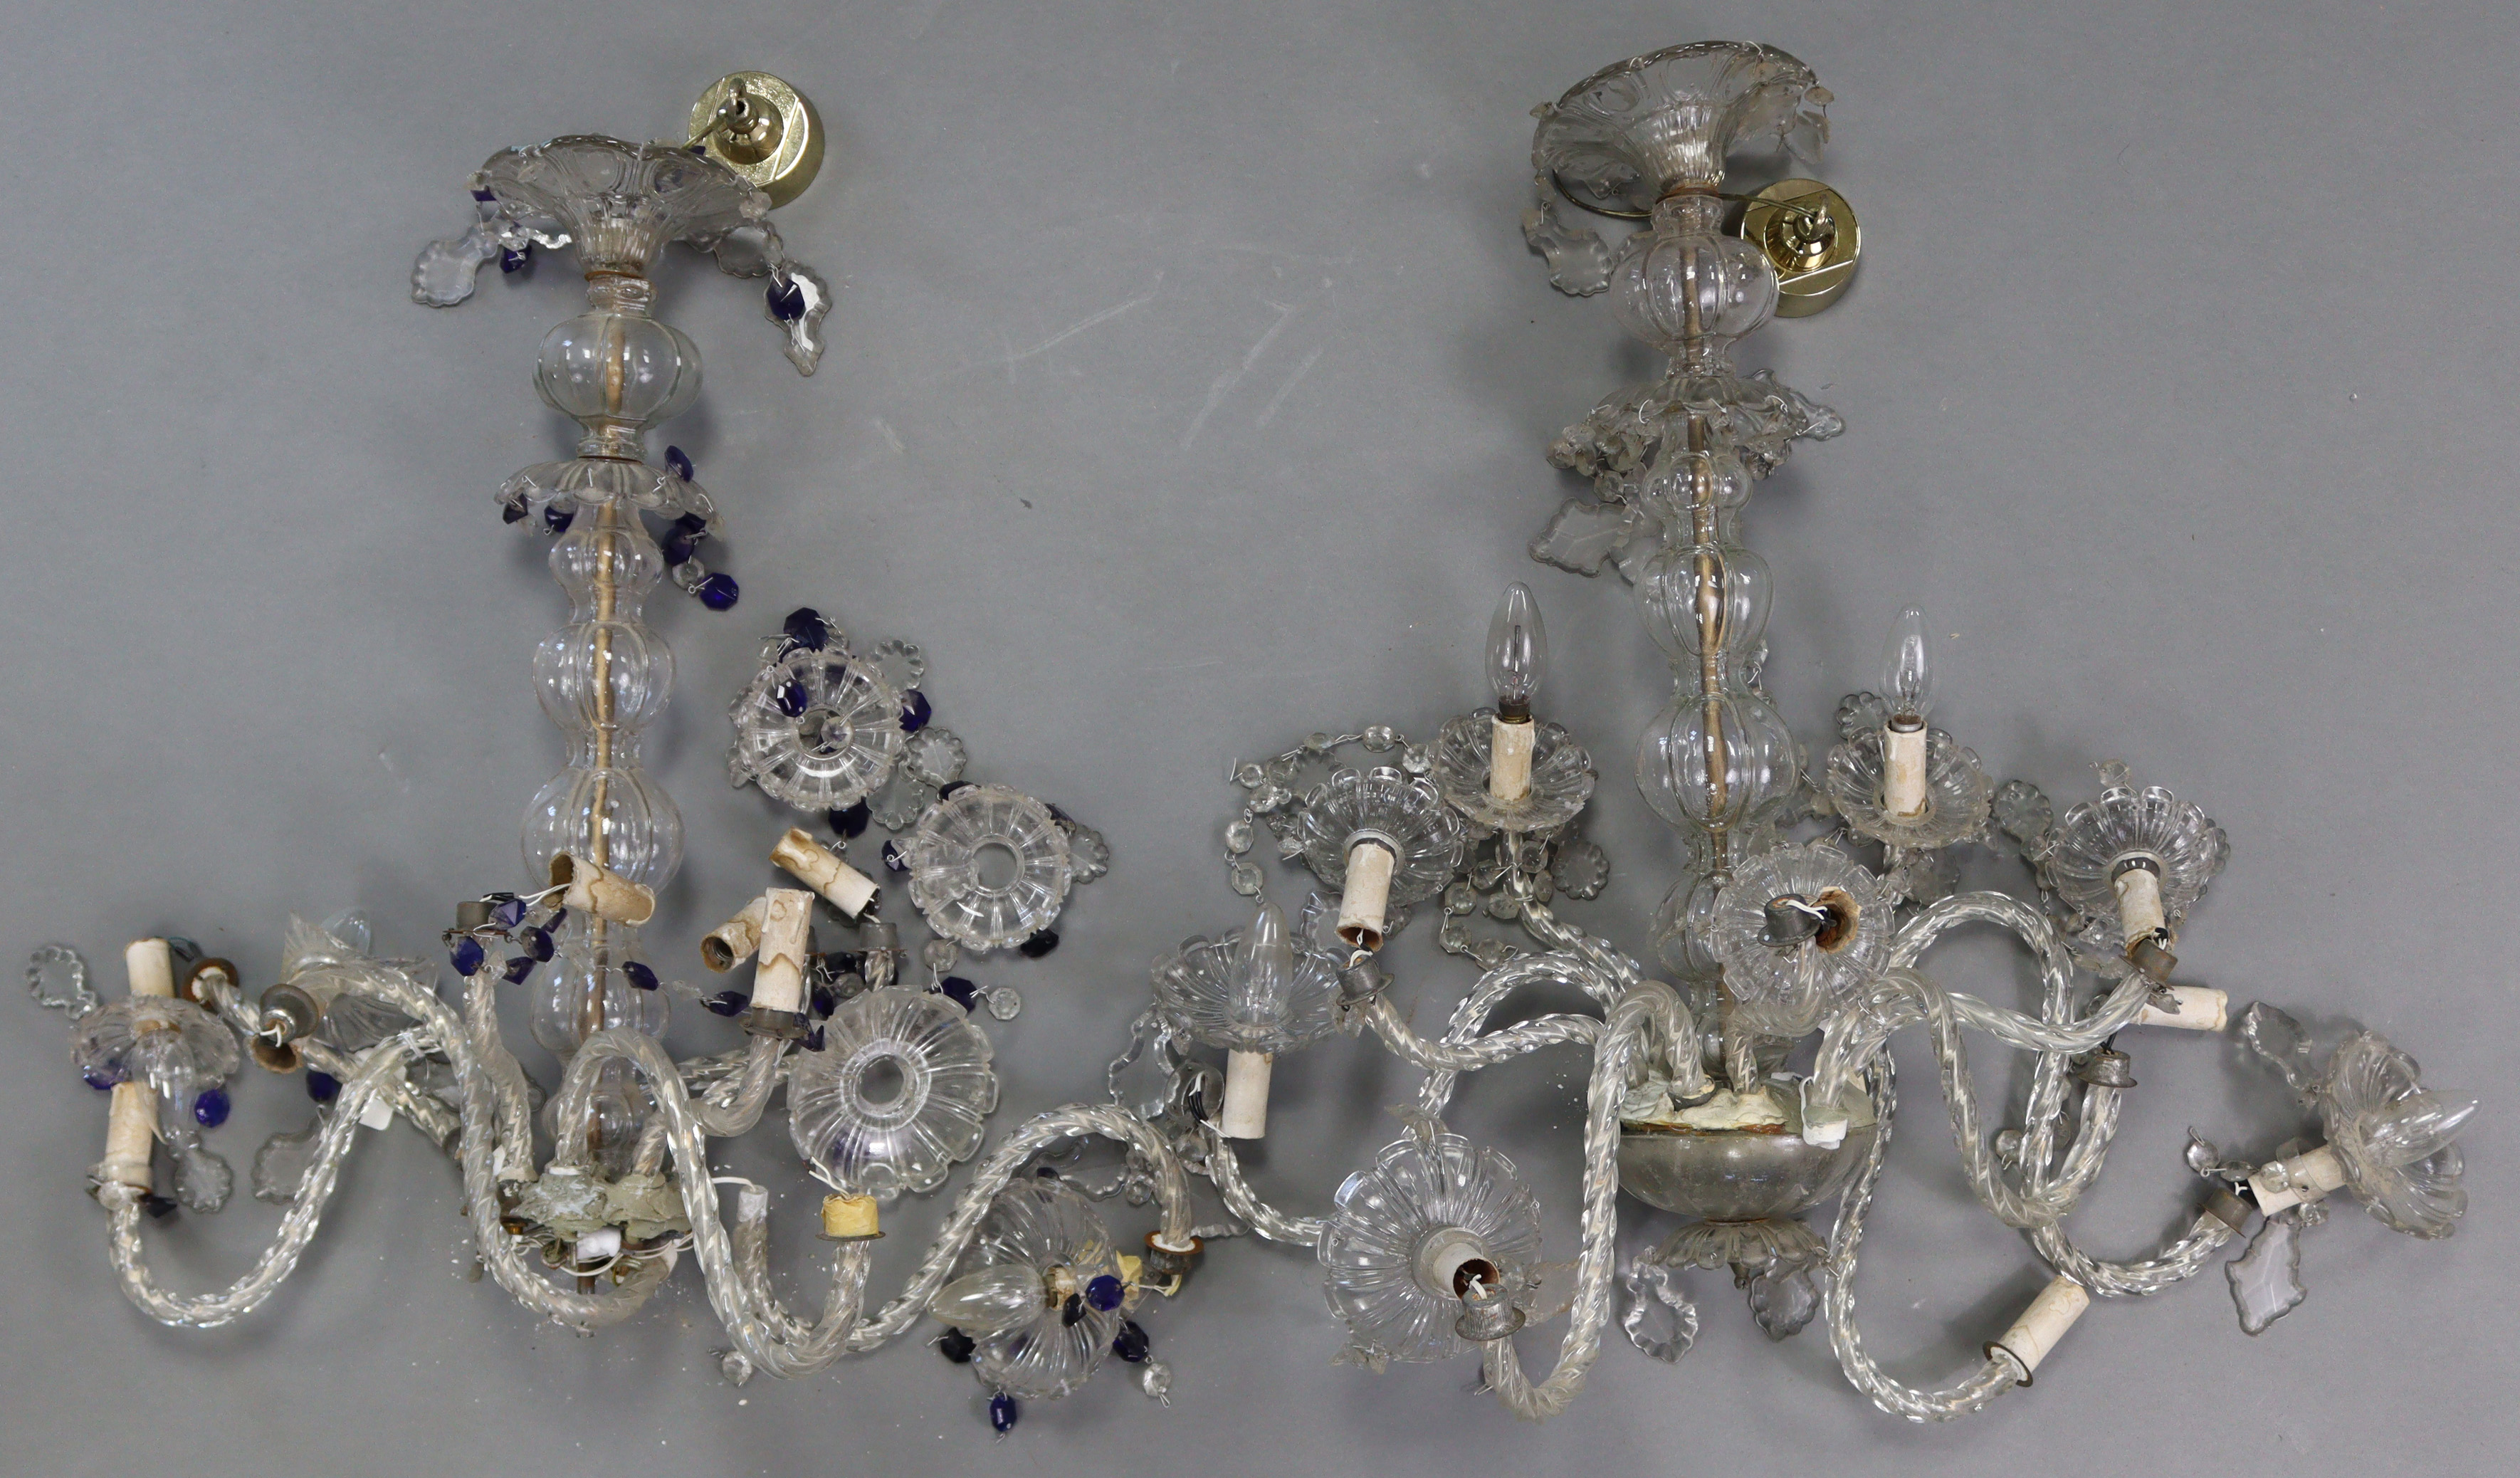 A pair of glass eight-branch chandeliers hung with prism drops & strands-of-beads, 20” wide x 31”